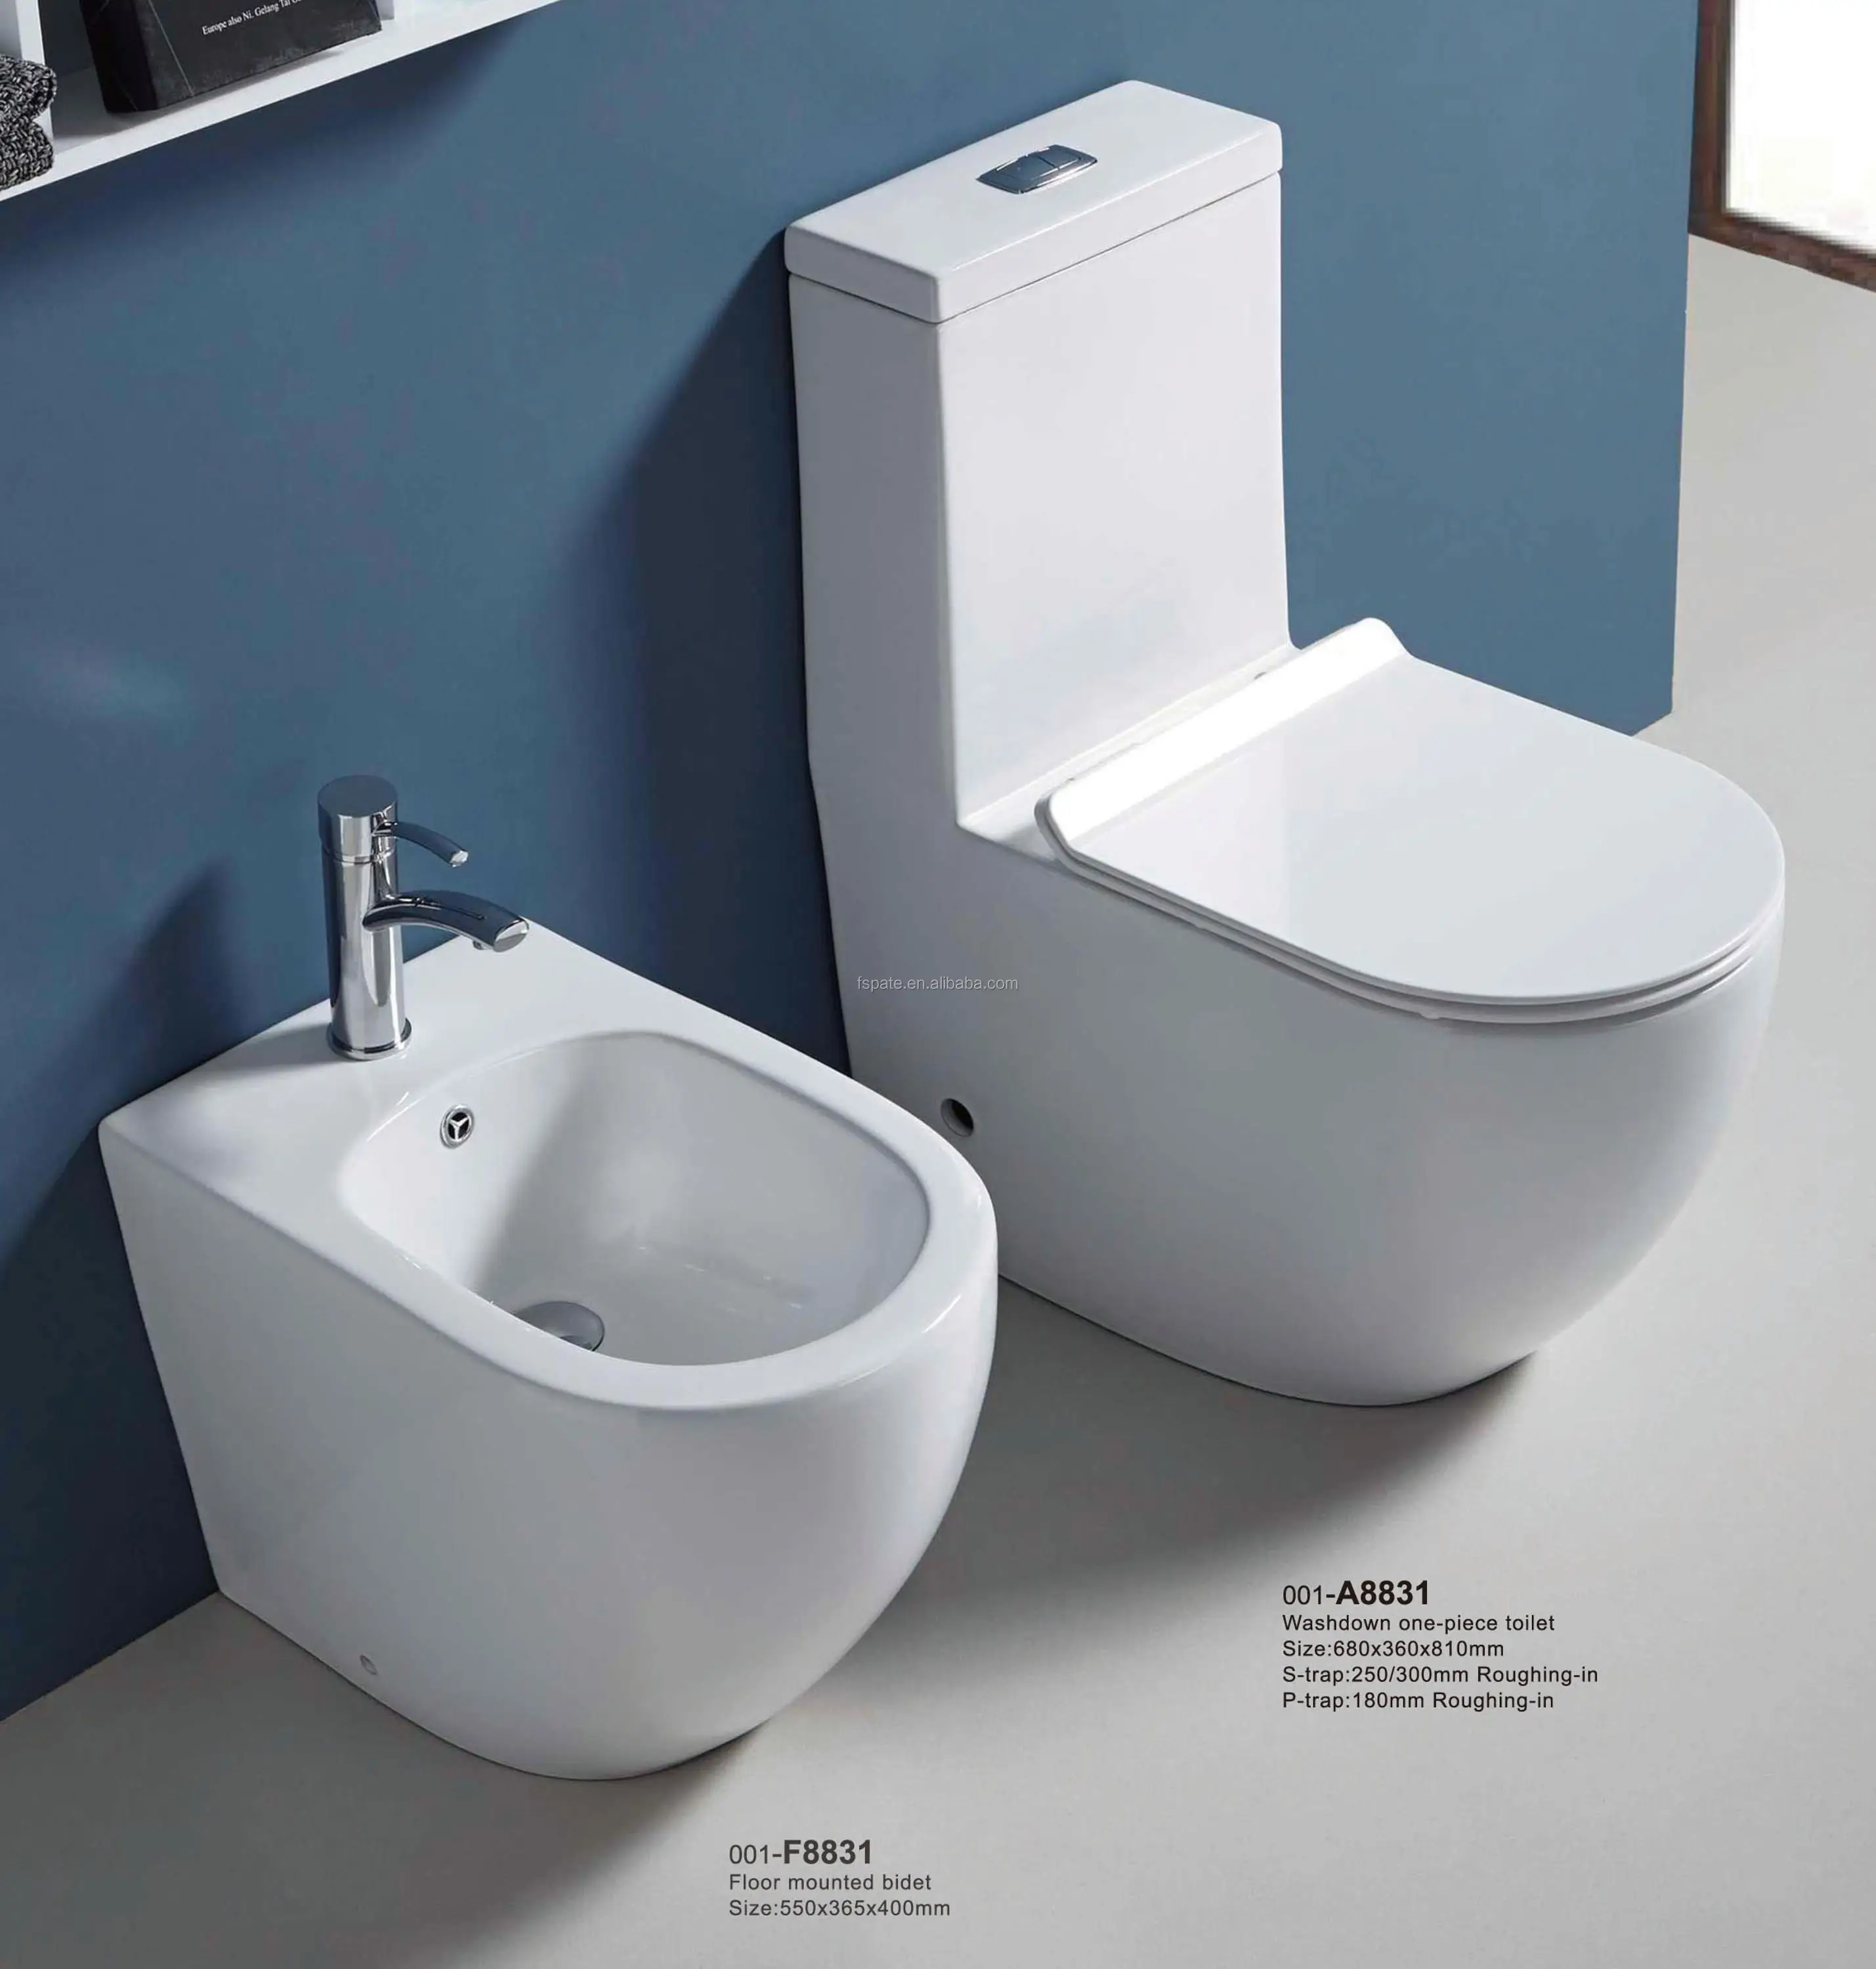 13 Best Bidets and Bidet Attachments in 2021 for Your Toilet - SELF